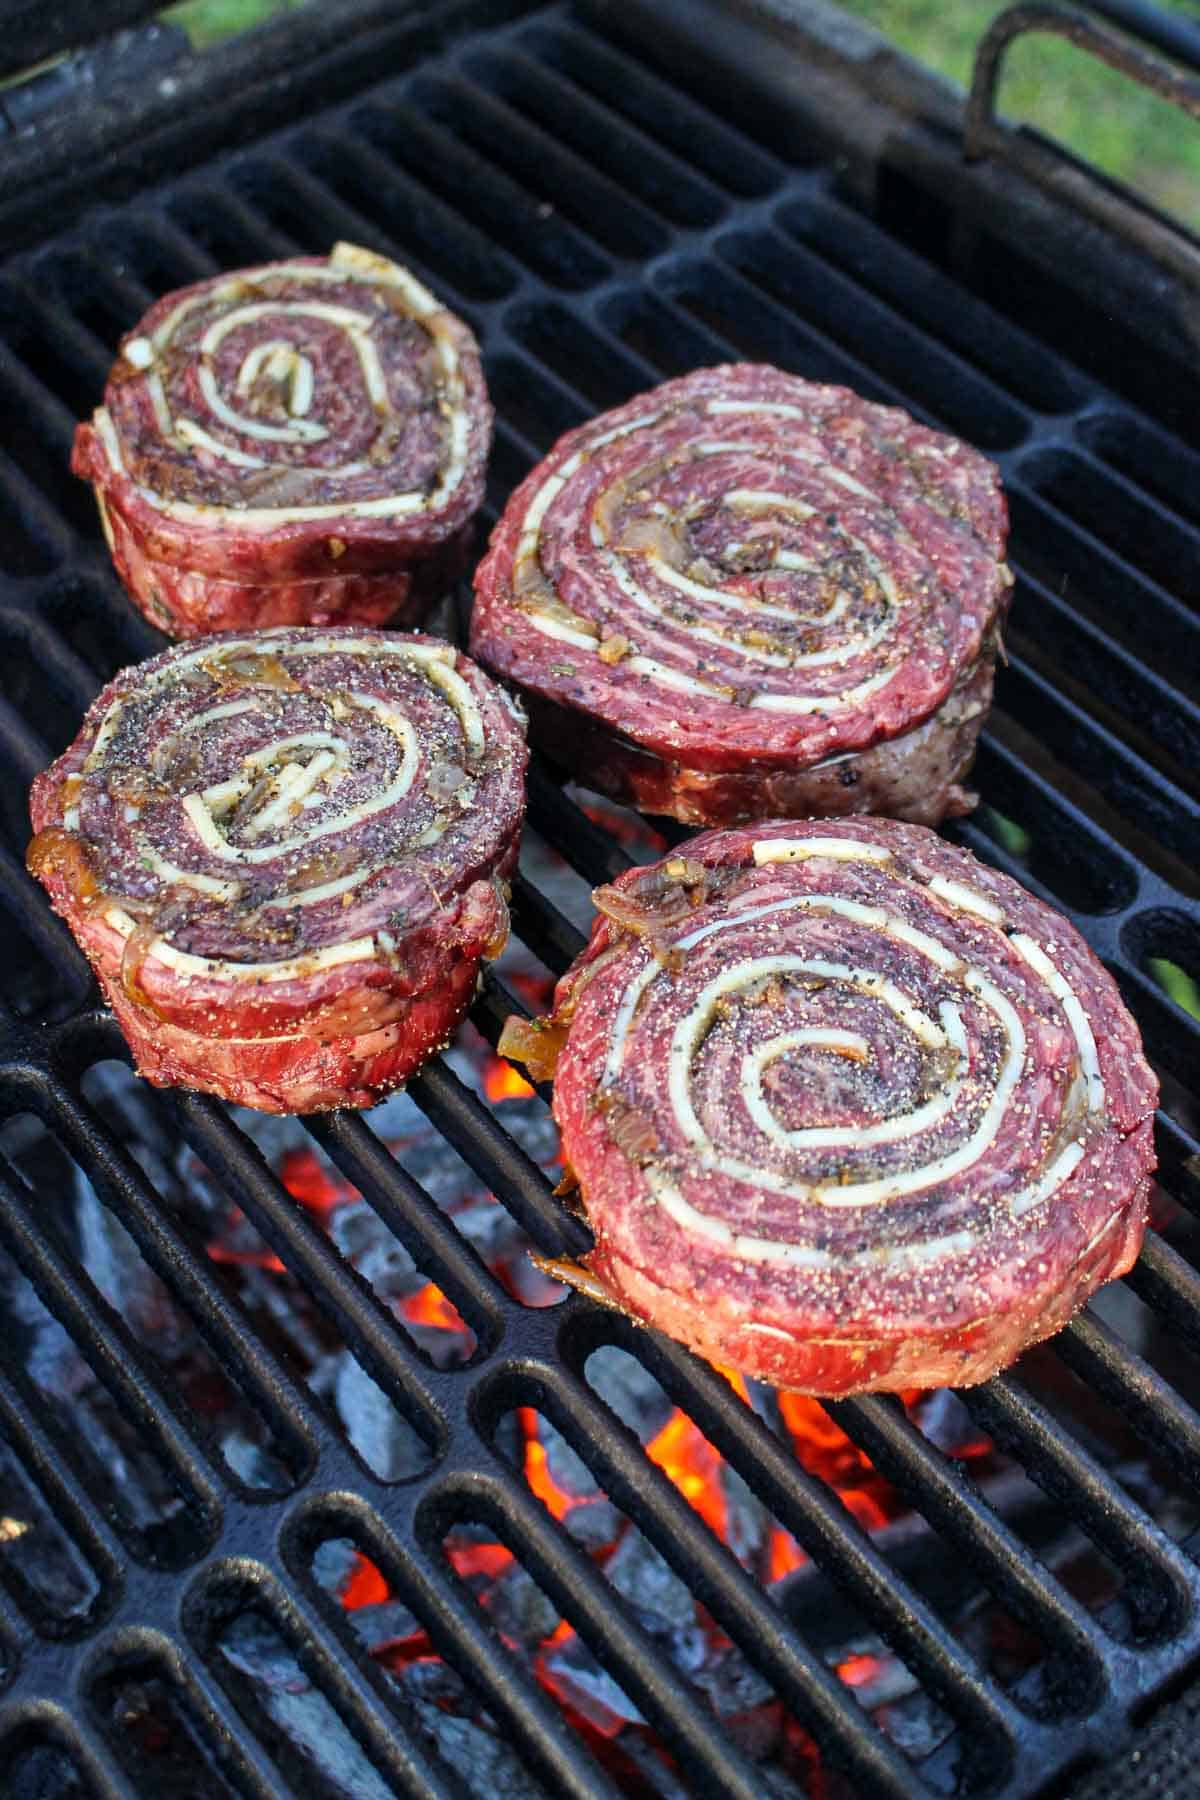 Adding the French Onion Steak Pinwheels to the grill to sear.